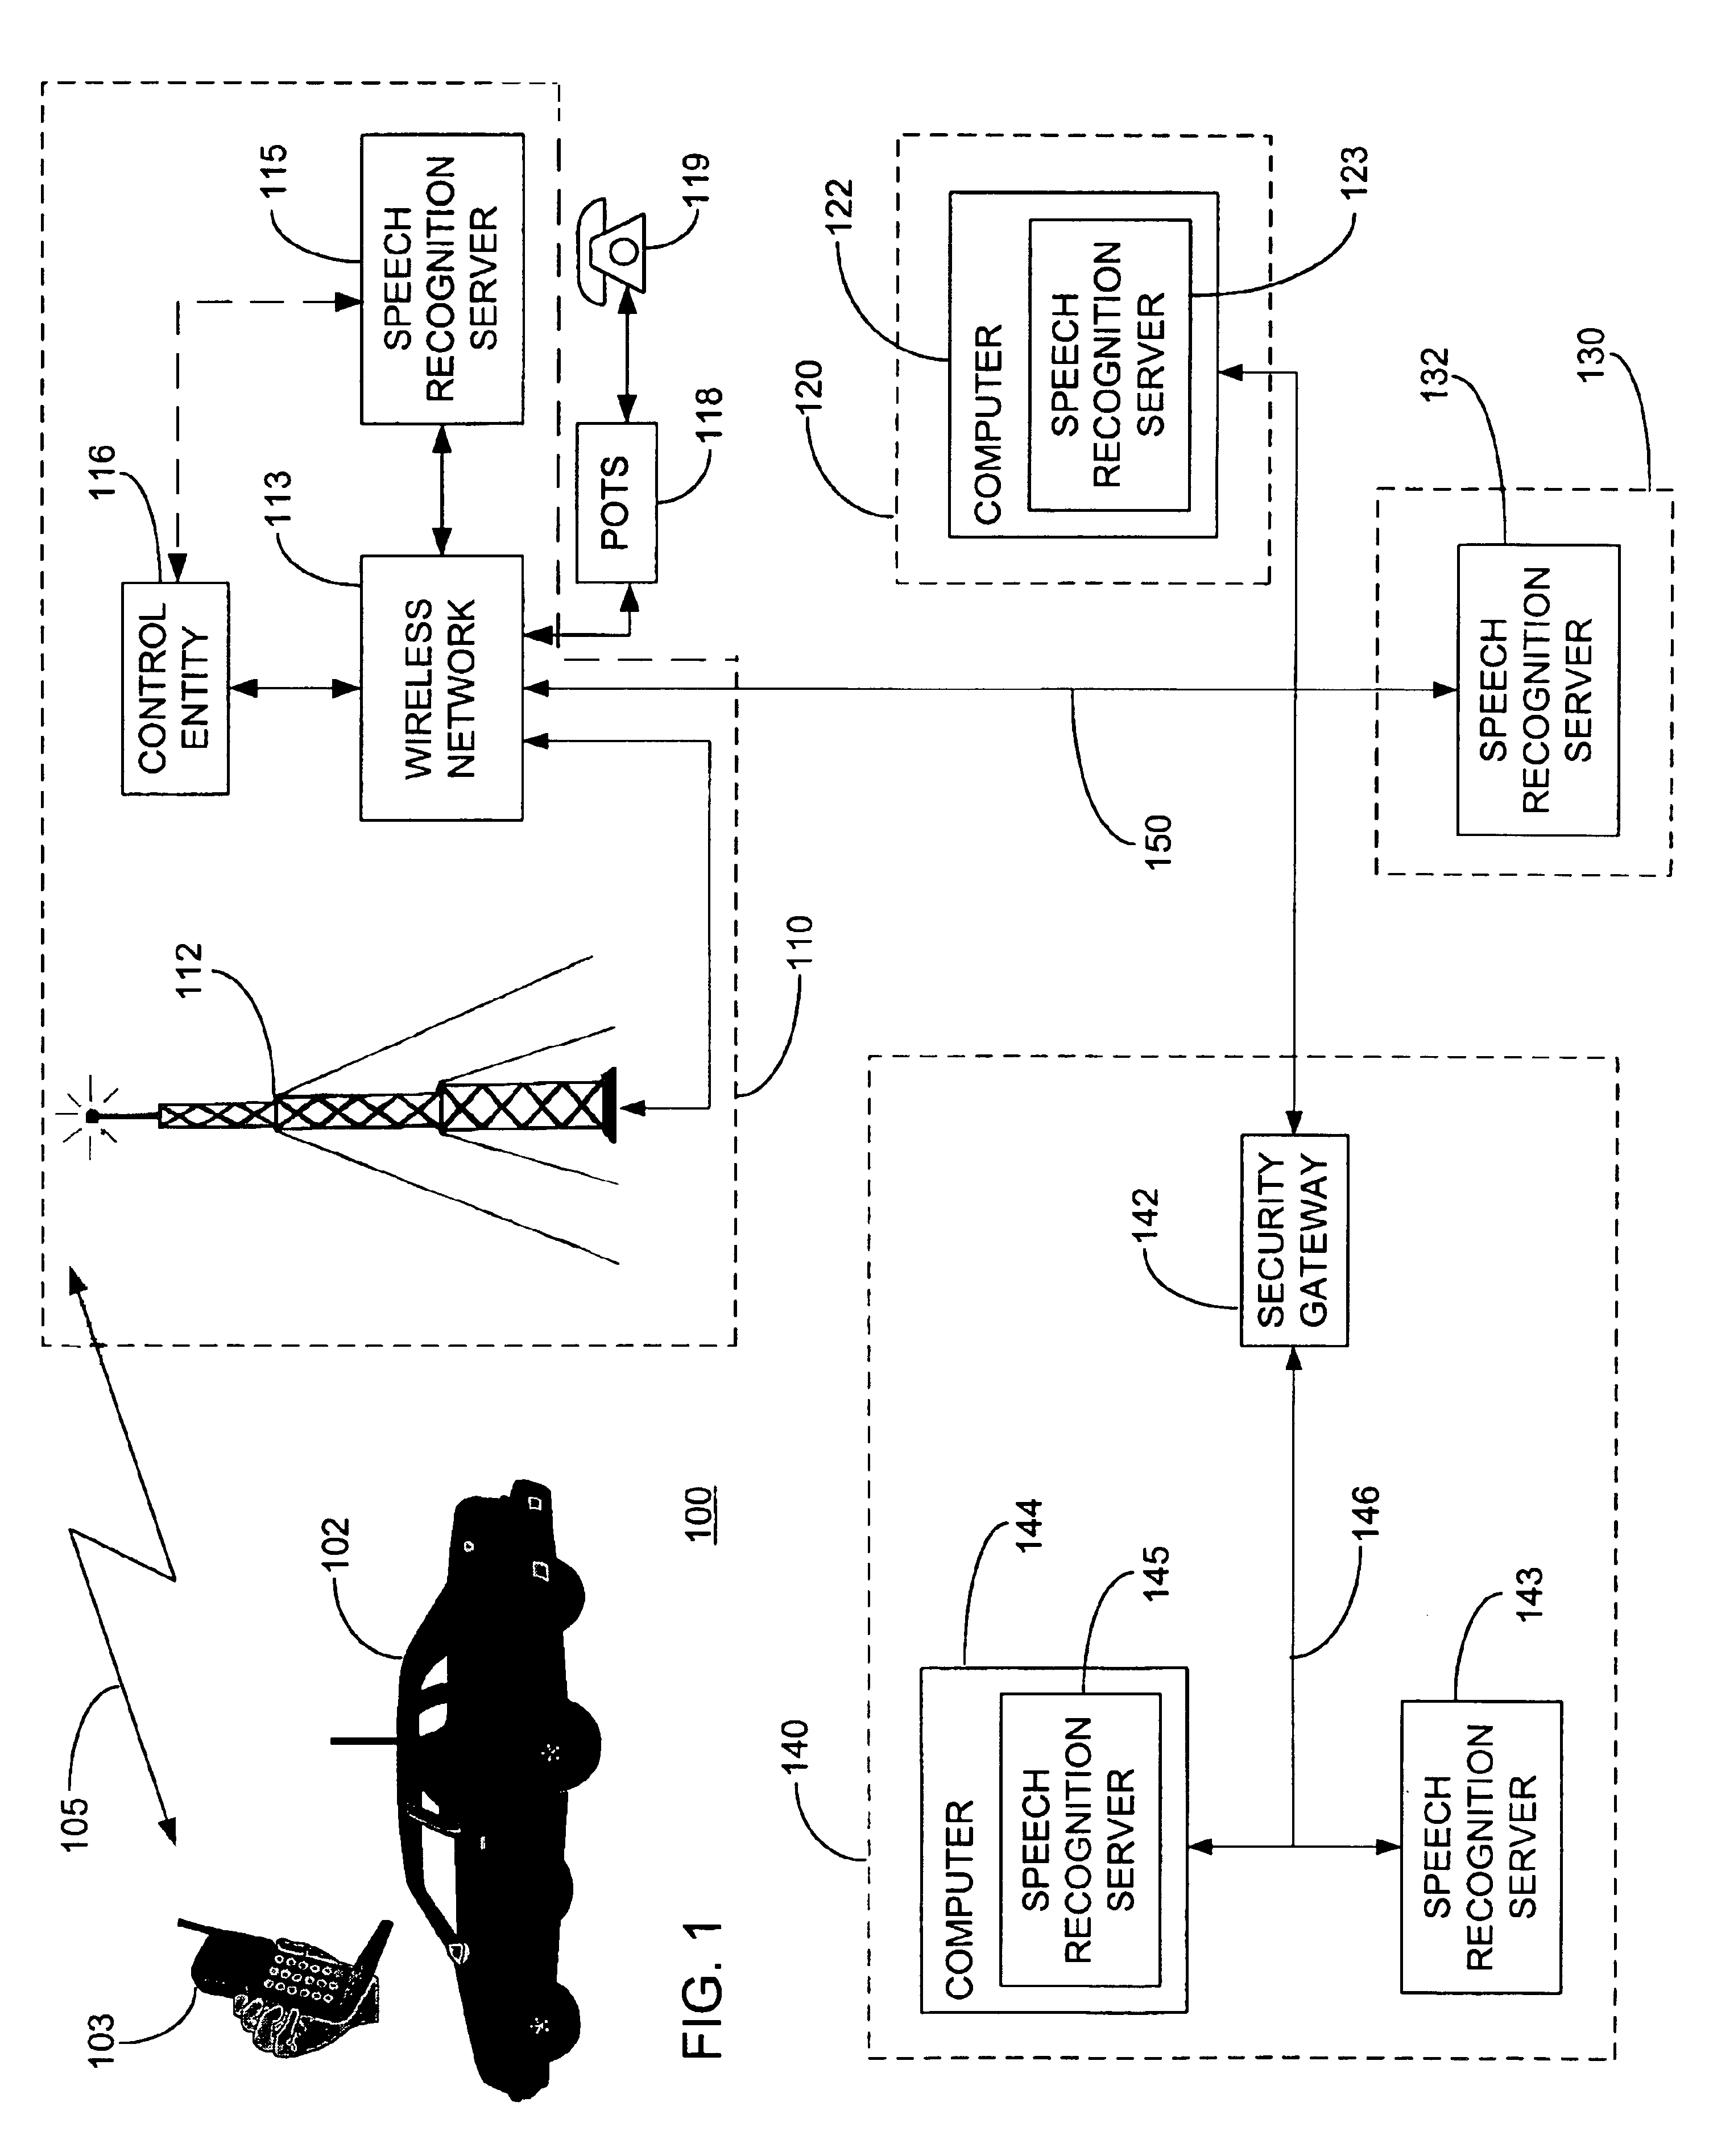 Method and apparatus for processing an input speech signal during presentation of an output audio signal